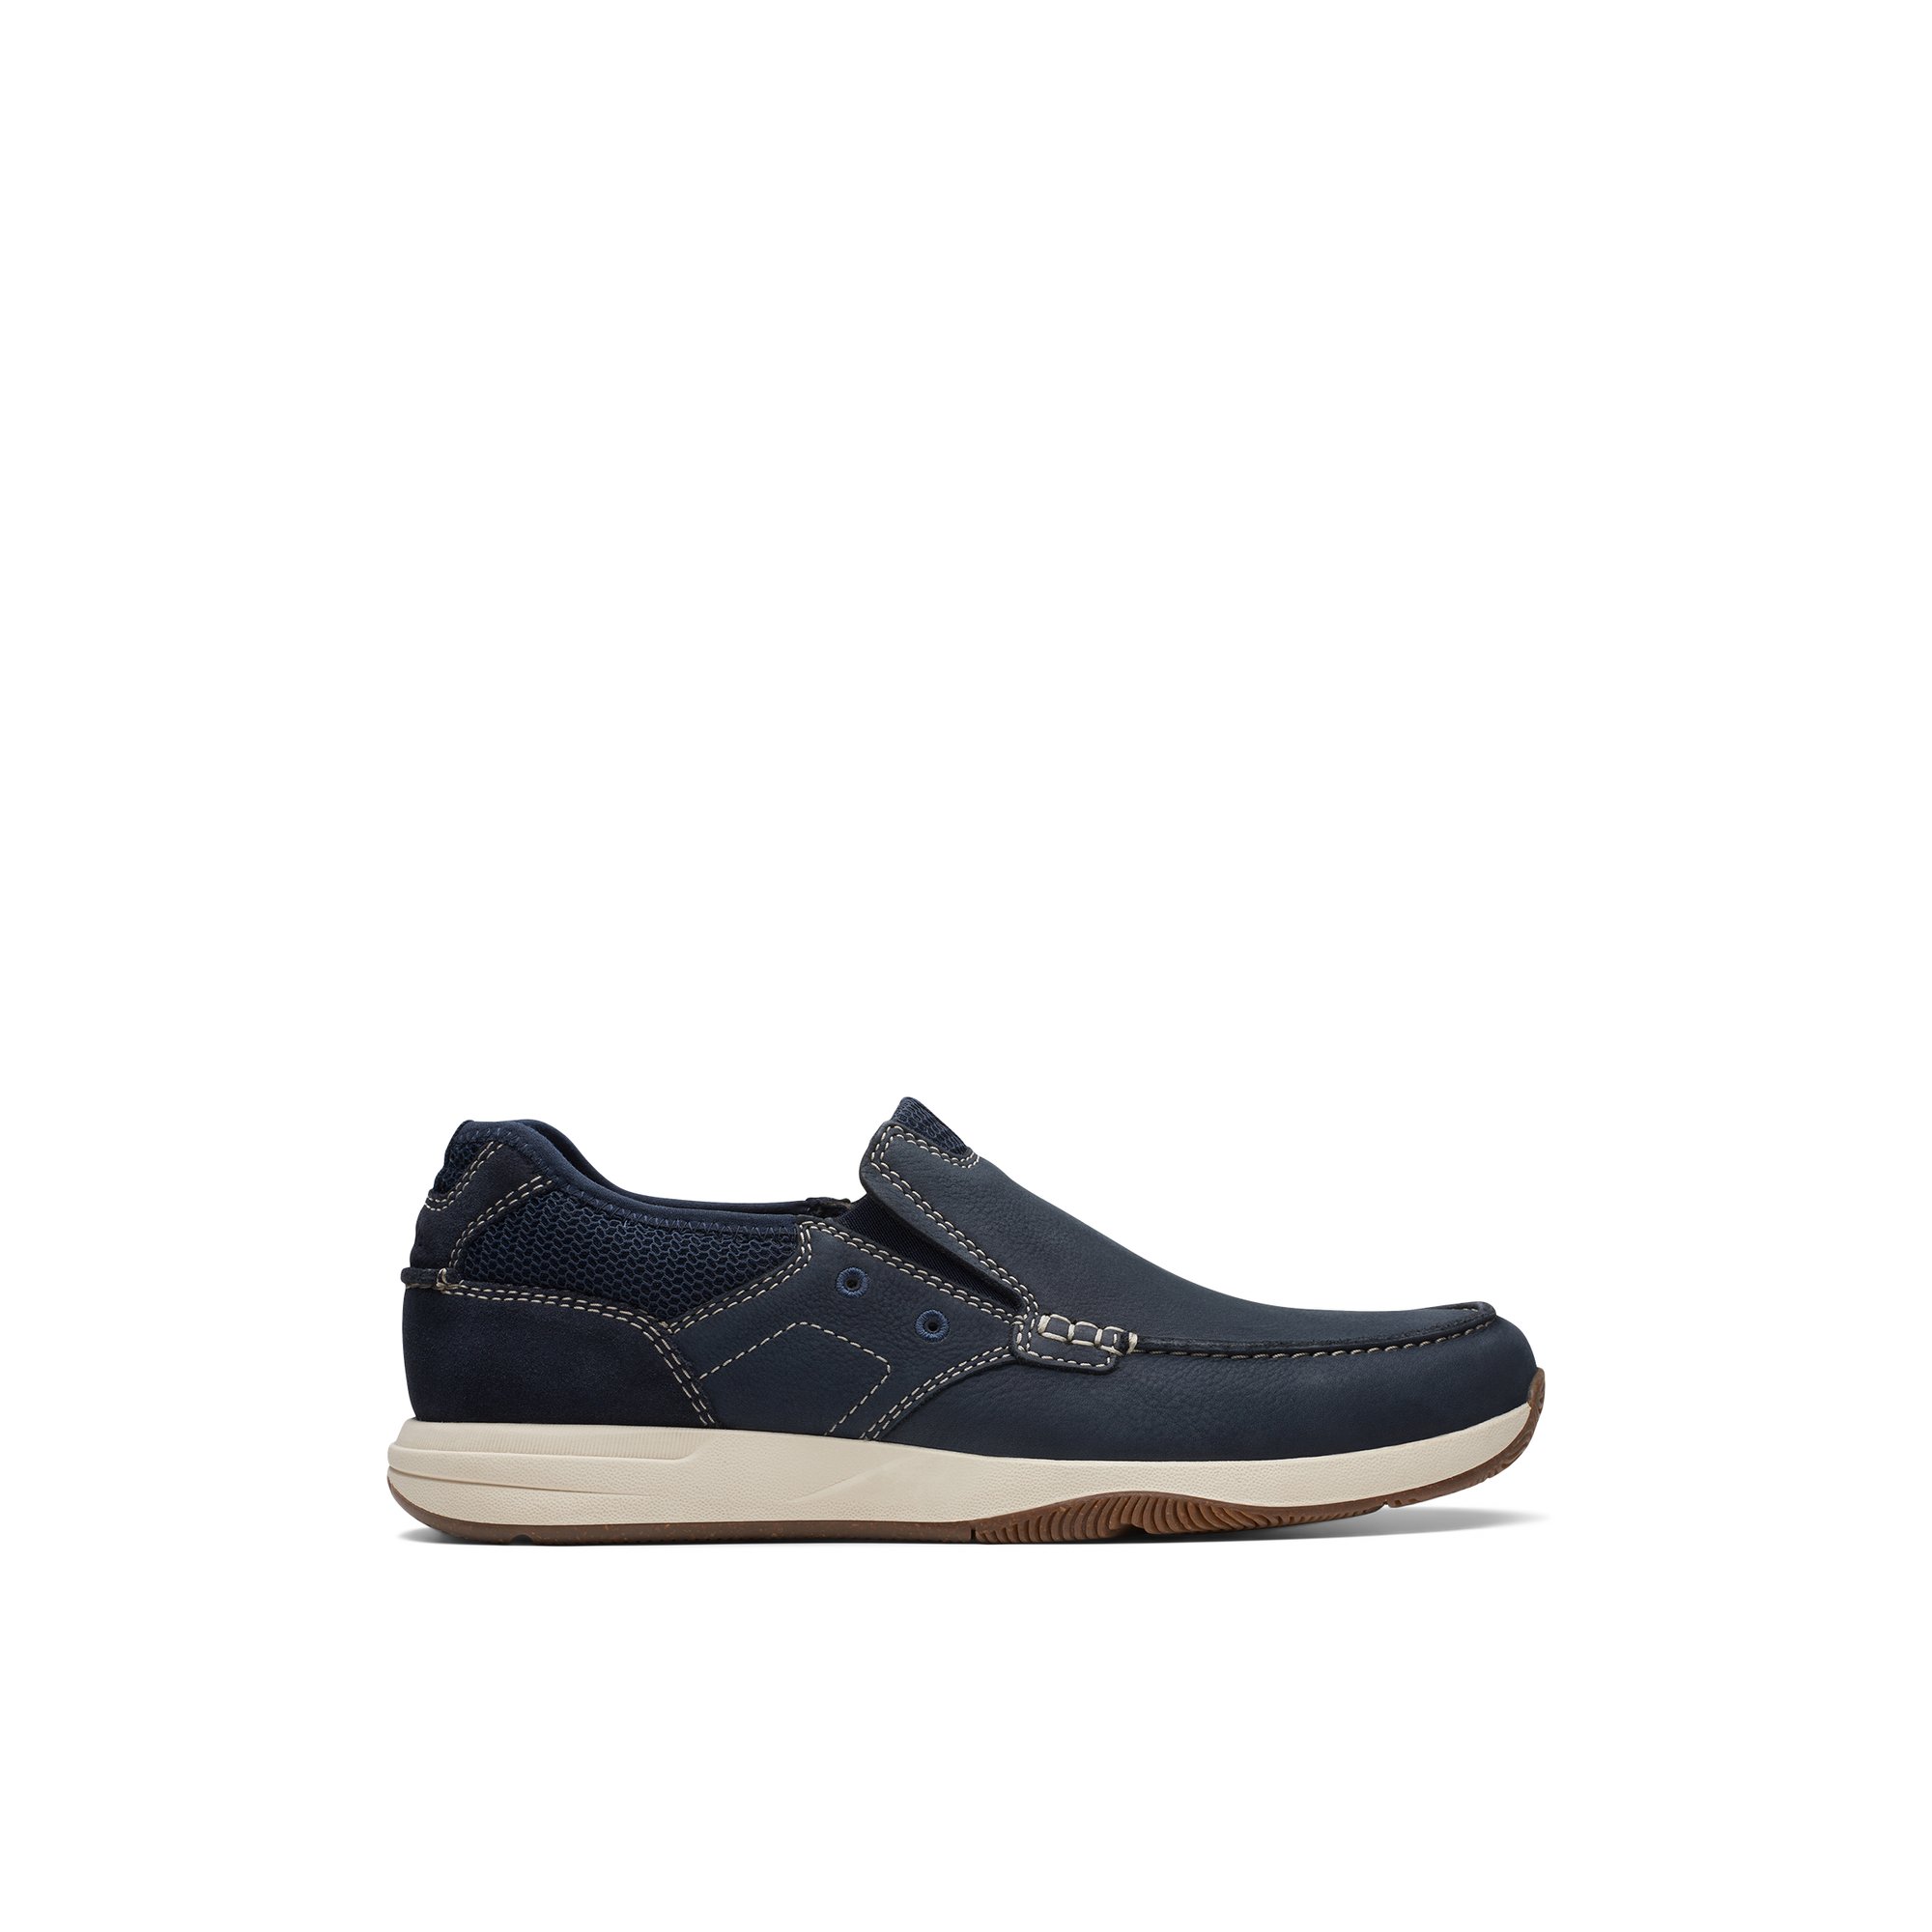 Clarks Sailview s-w - Men's Footwear Shoes Casual Loafers